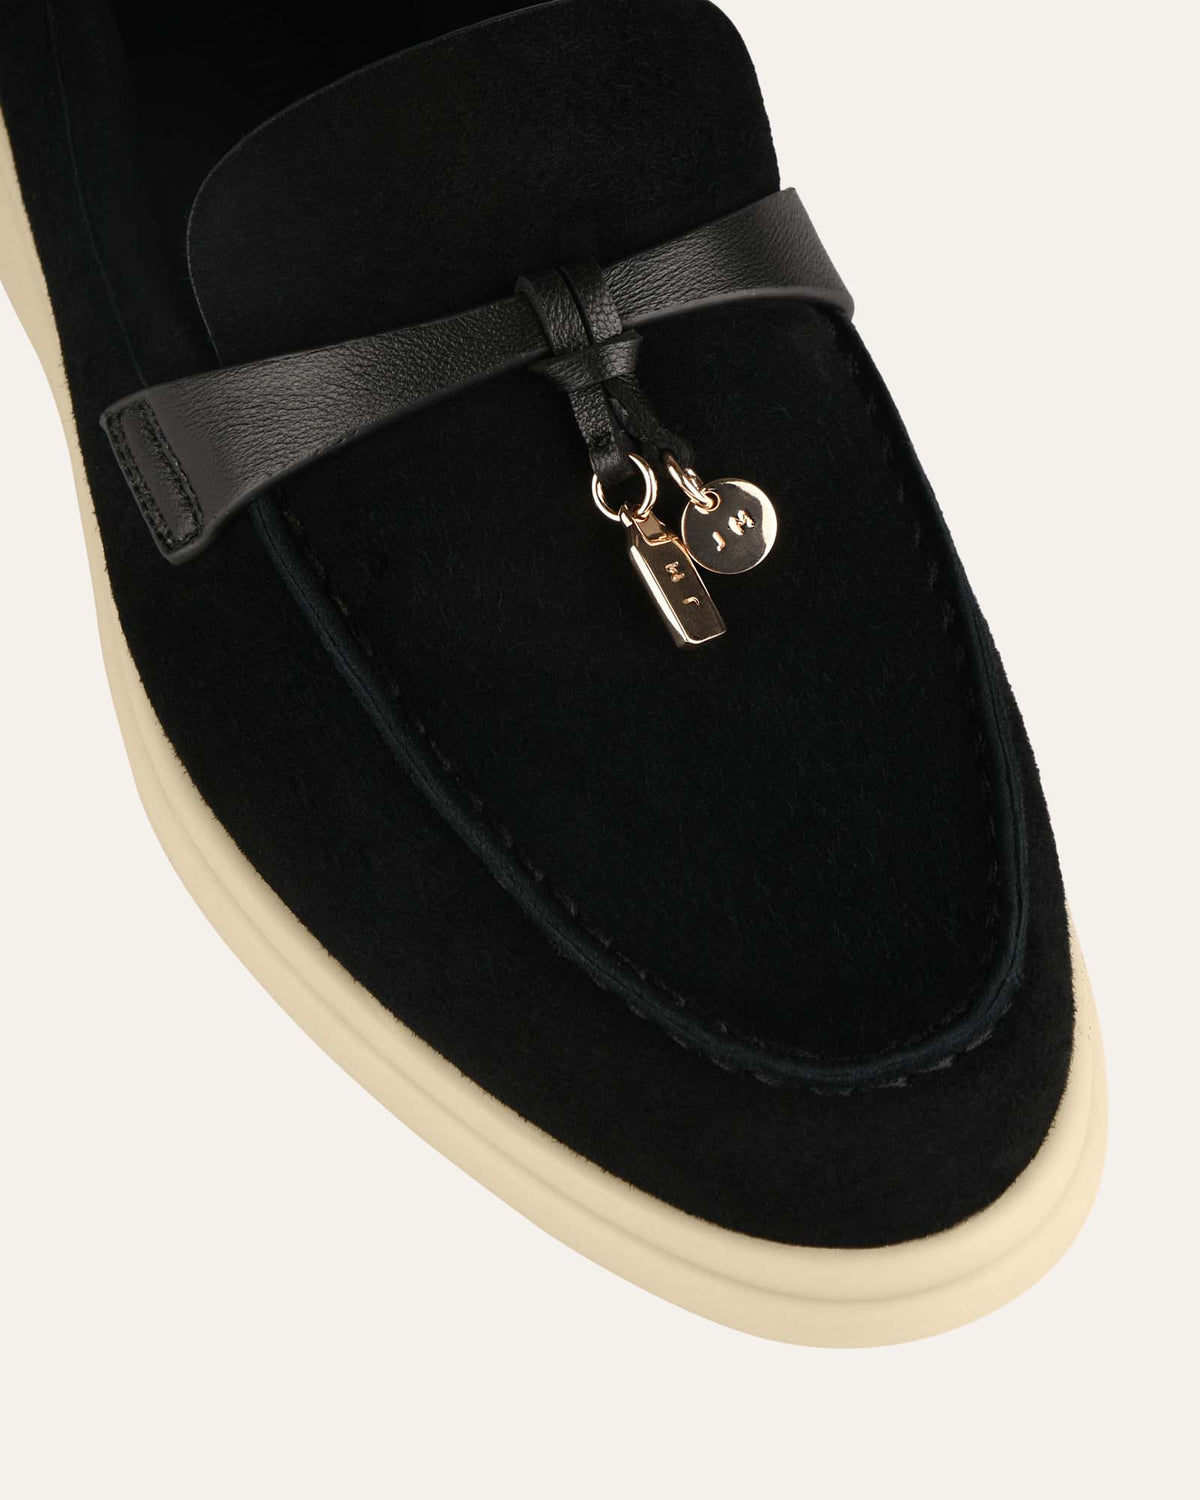 CIRCA LOAFERS SOFT BLACK SUEDE